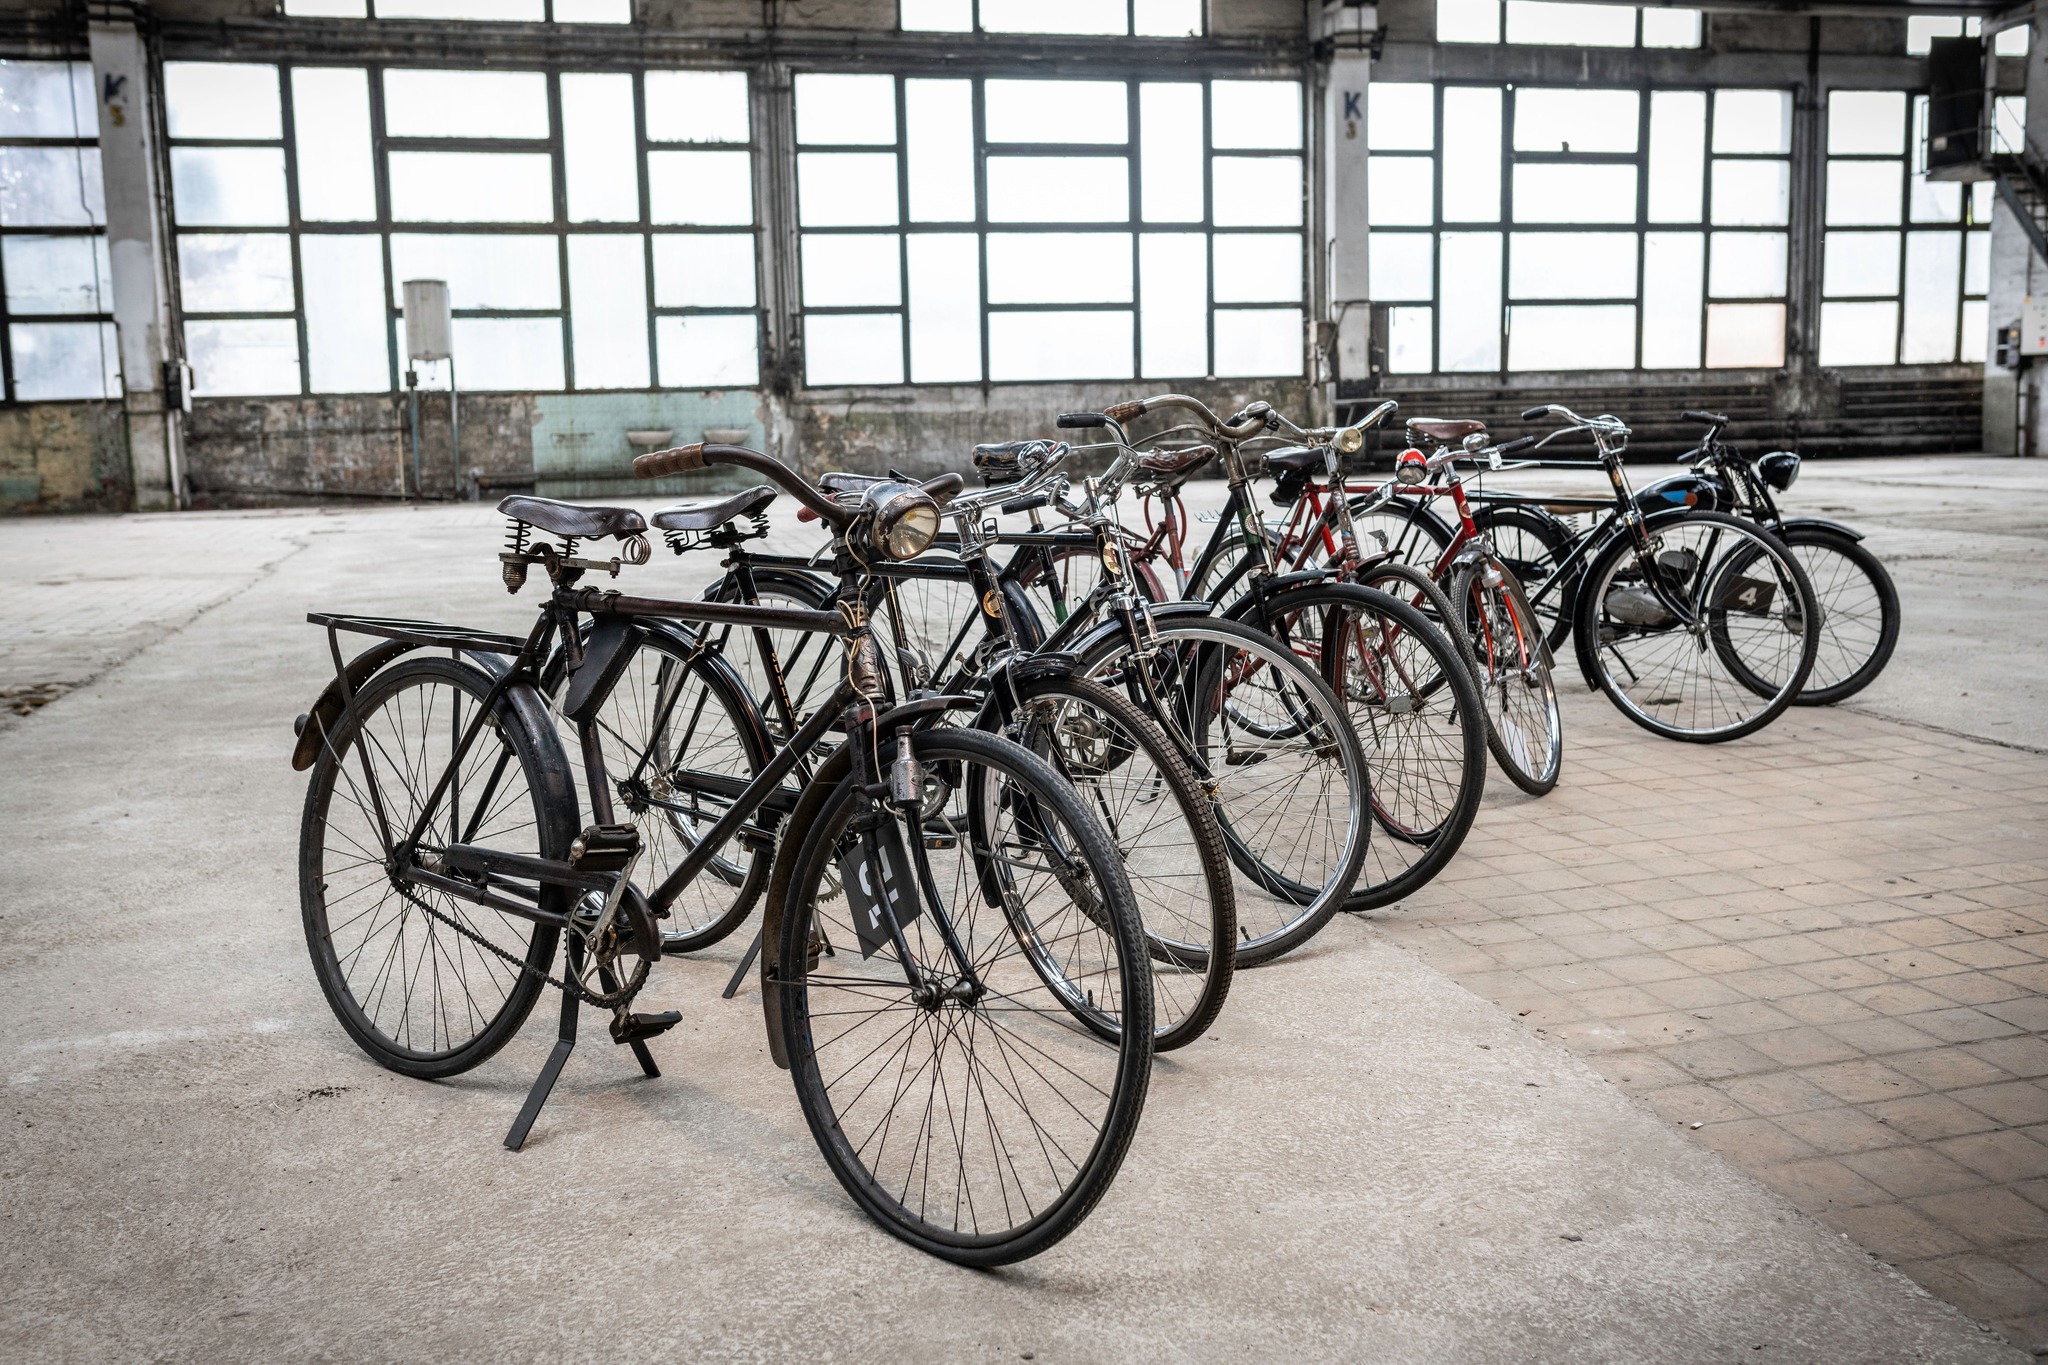 Evolution of Cycling Shown in New Exhibition at Transport Museum